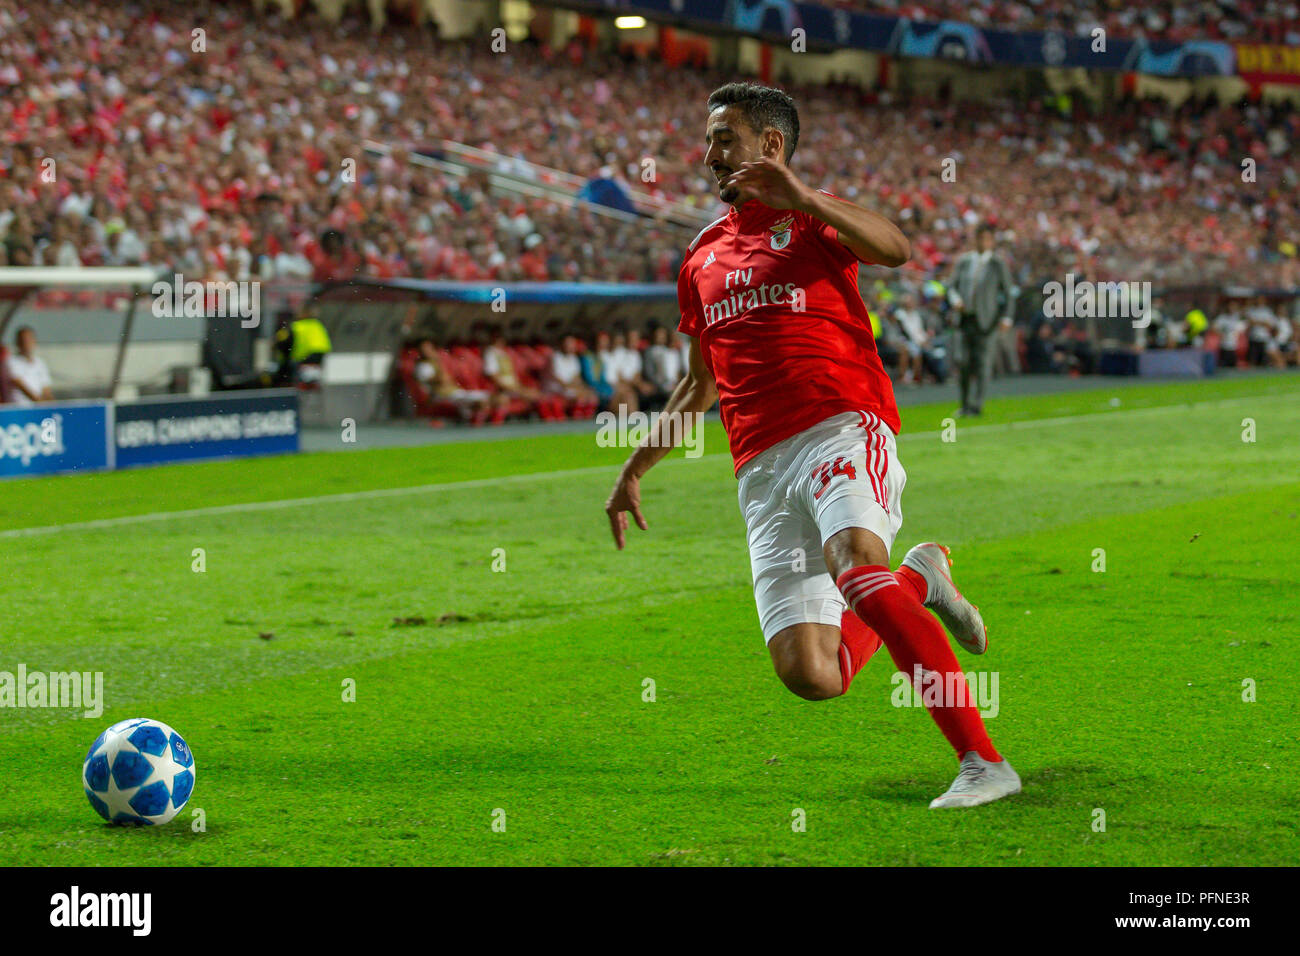 Lisbon, Portugal. August 21, 2018. Benfica's defender from Portugal Andre Almeida (34) during the game of the 1st leg of the Playoffs of the UEFA Champions League, SL Benfica vs PAOK © Alexandre de Sousa/Alamy Live News Stock Photo